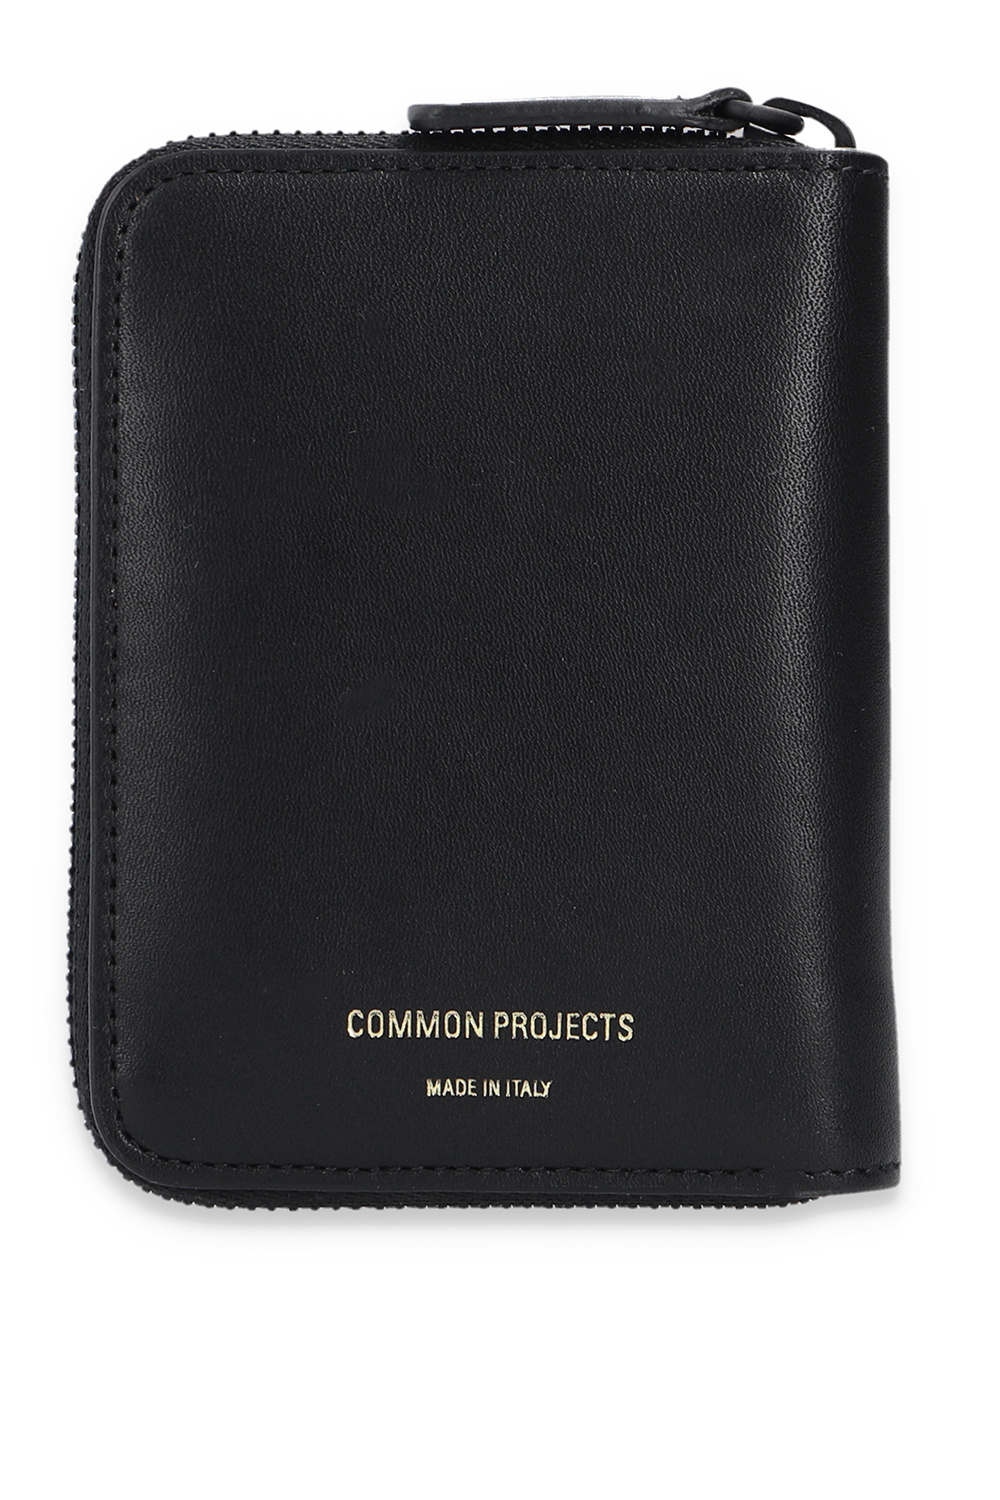 Common Projects ZIP COIN CASE 9180 0-BLACK 7547